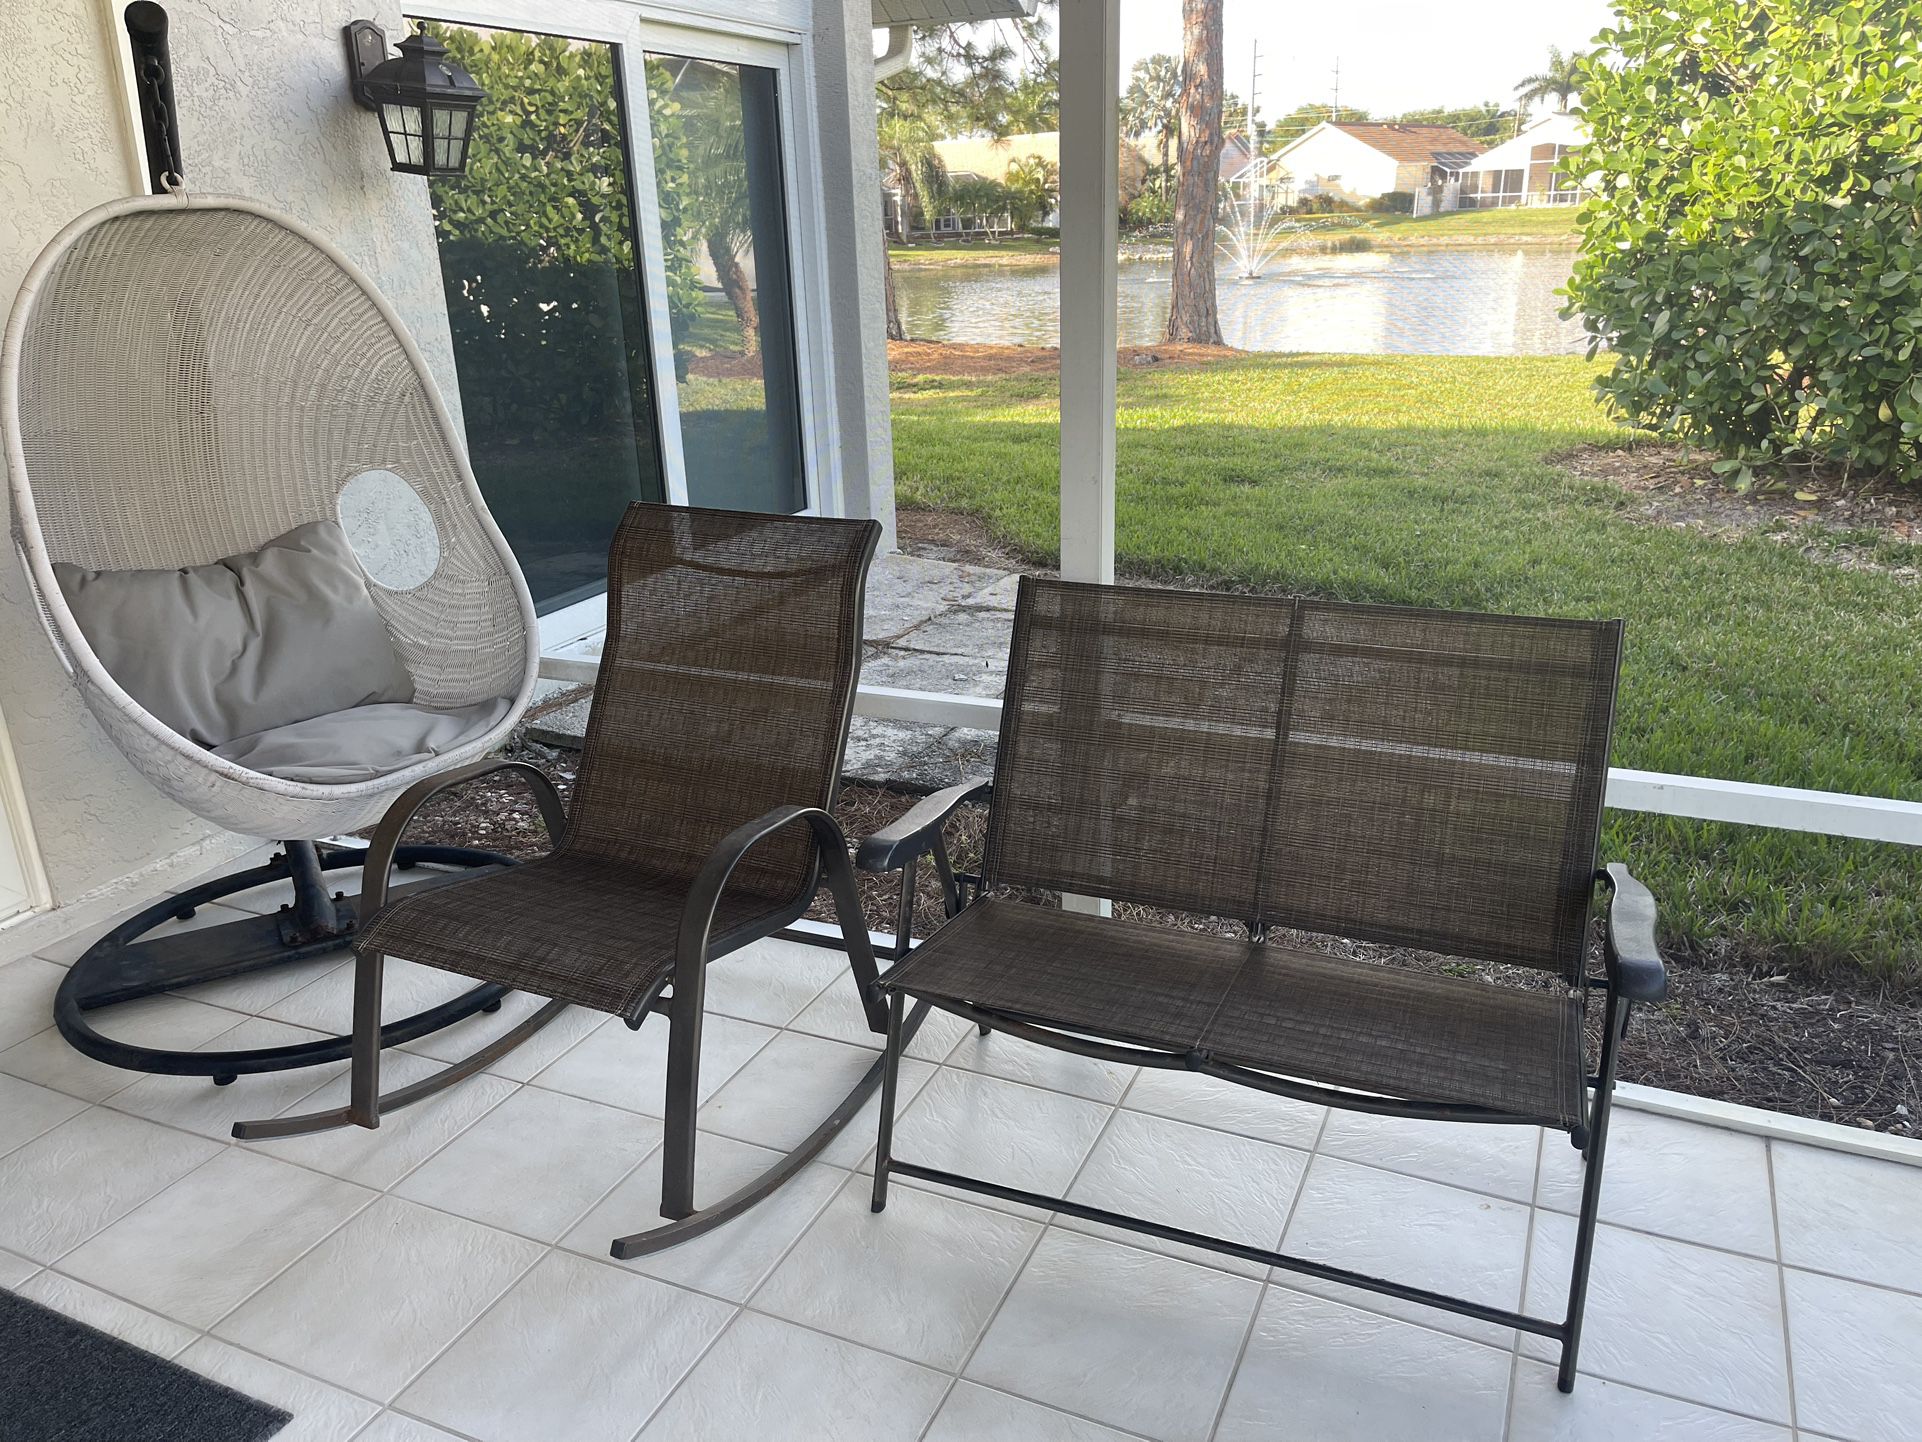 3 Patio Chairs :Hammock,Swing Egg Chair with Stand , hammock,,folding chair